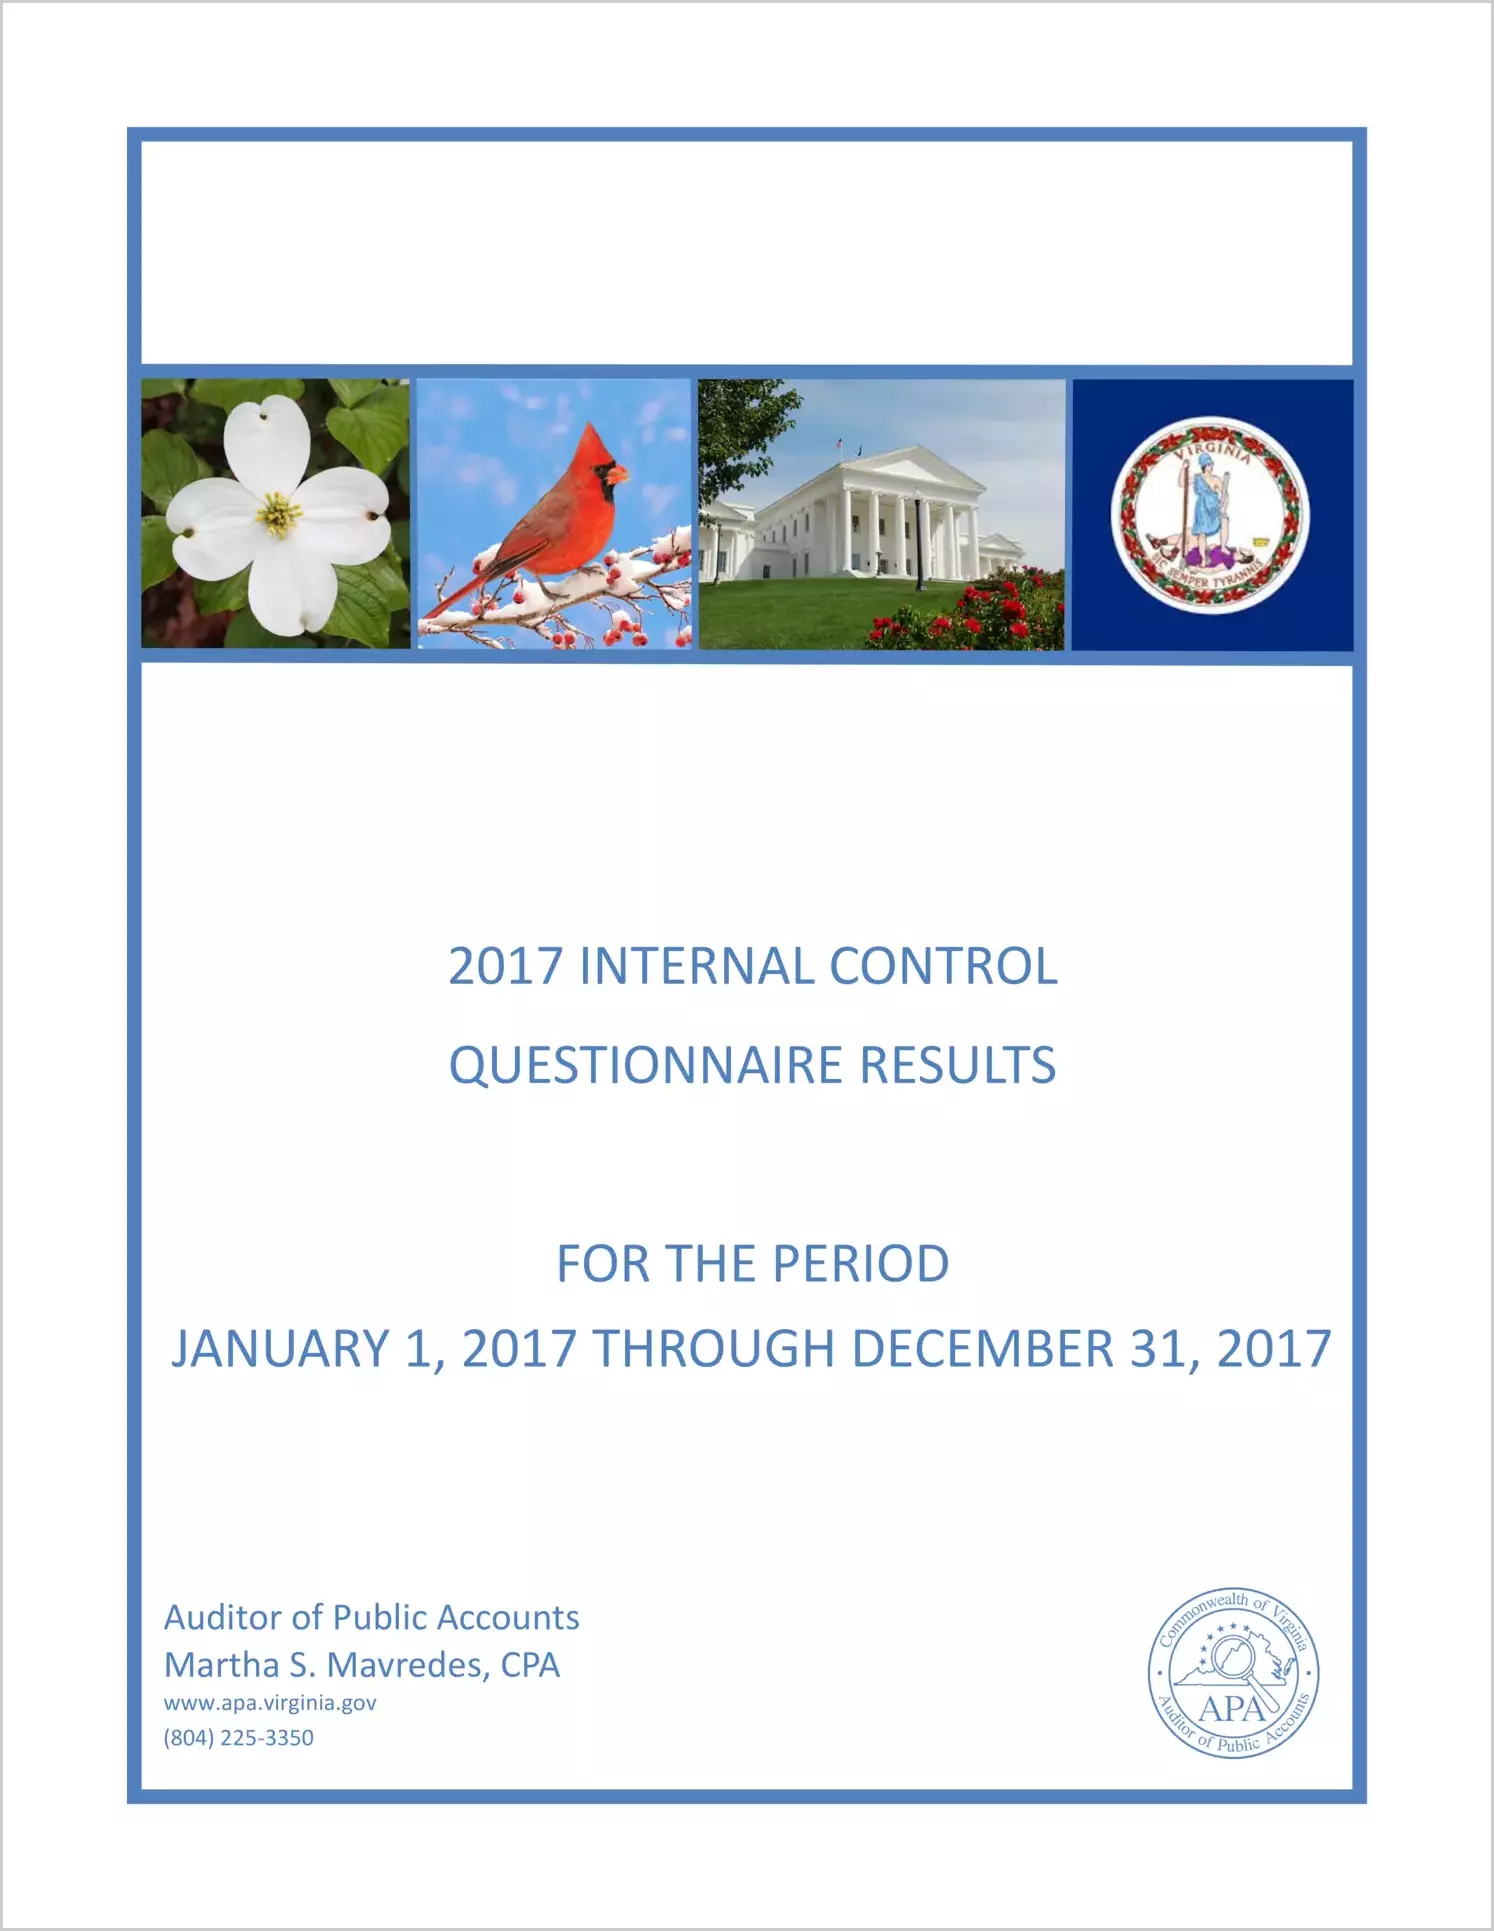 2017 Internal Control Questionnaire Results for the period January 1, 2017 through December 31, 2017